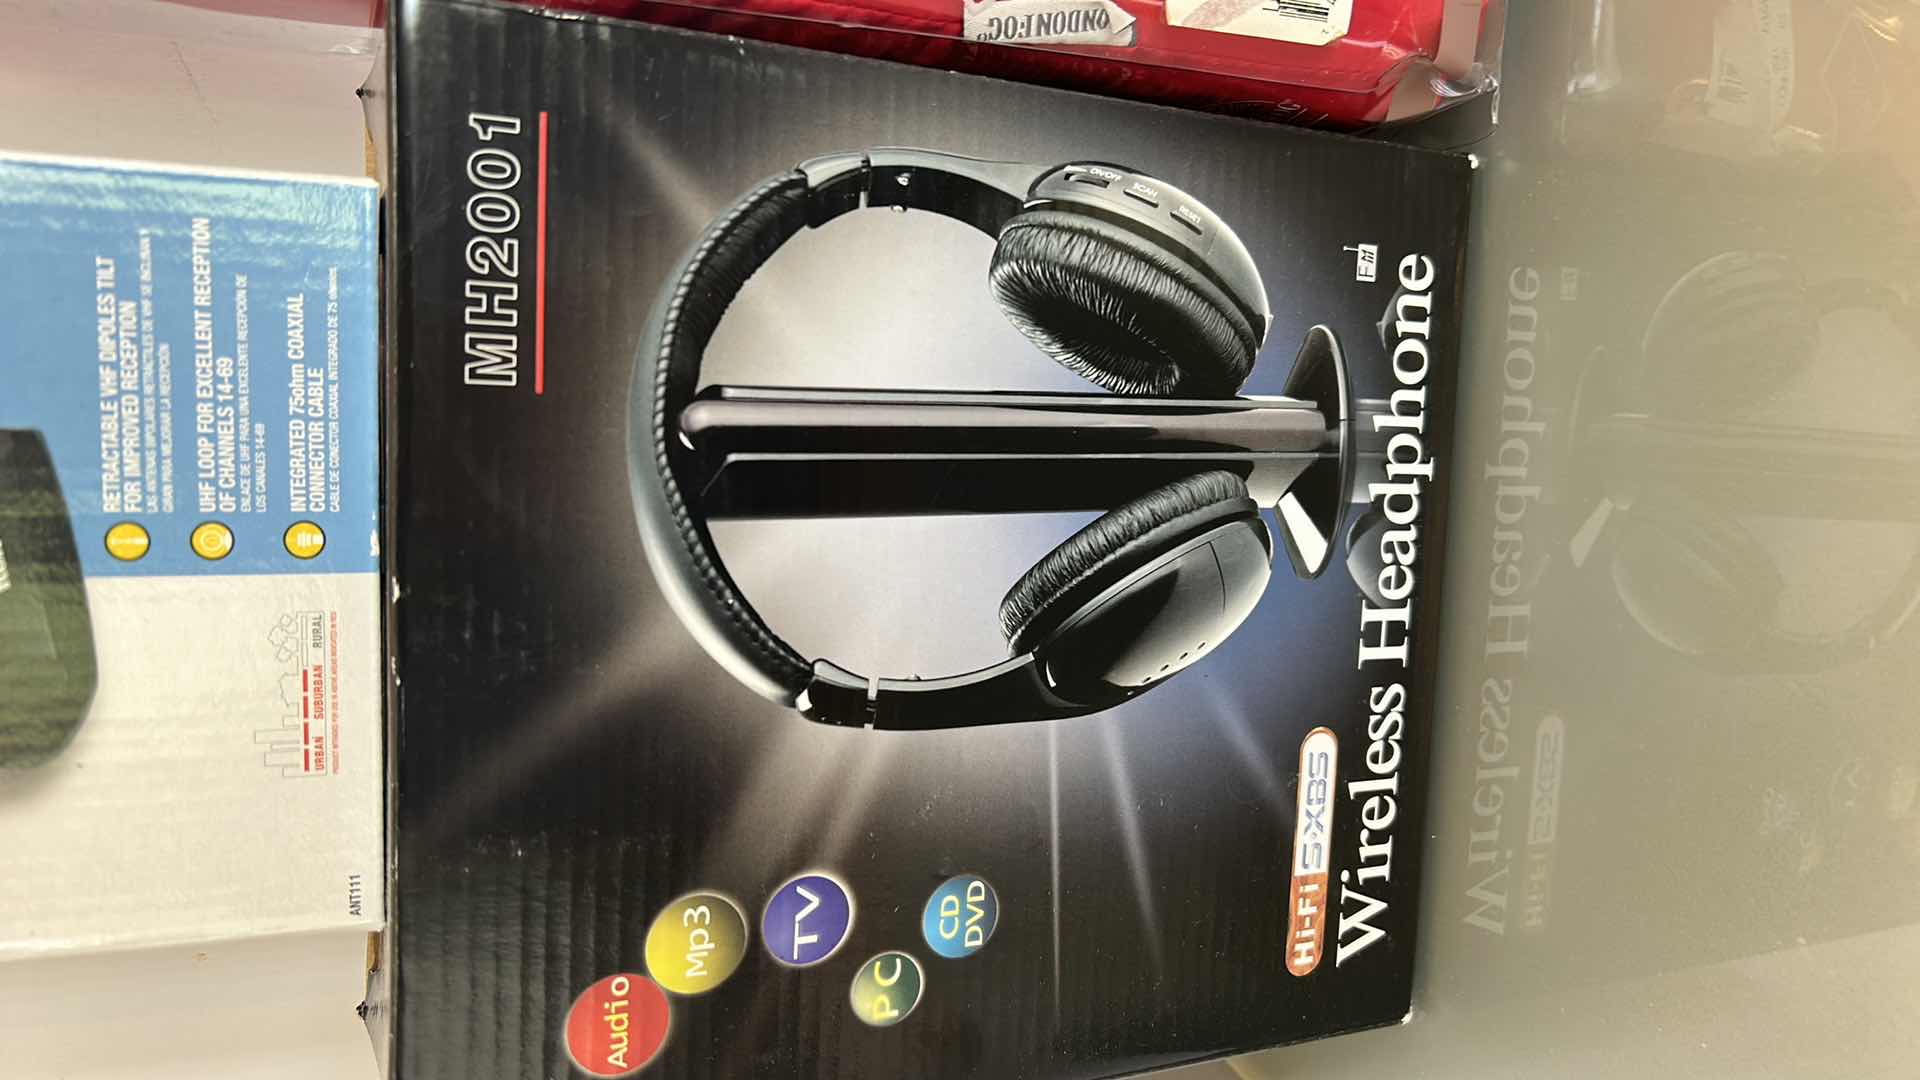 Photo 2 of NEW BOXED ITEMS - HEADPHONES AND MORE